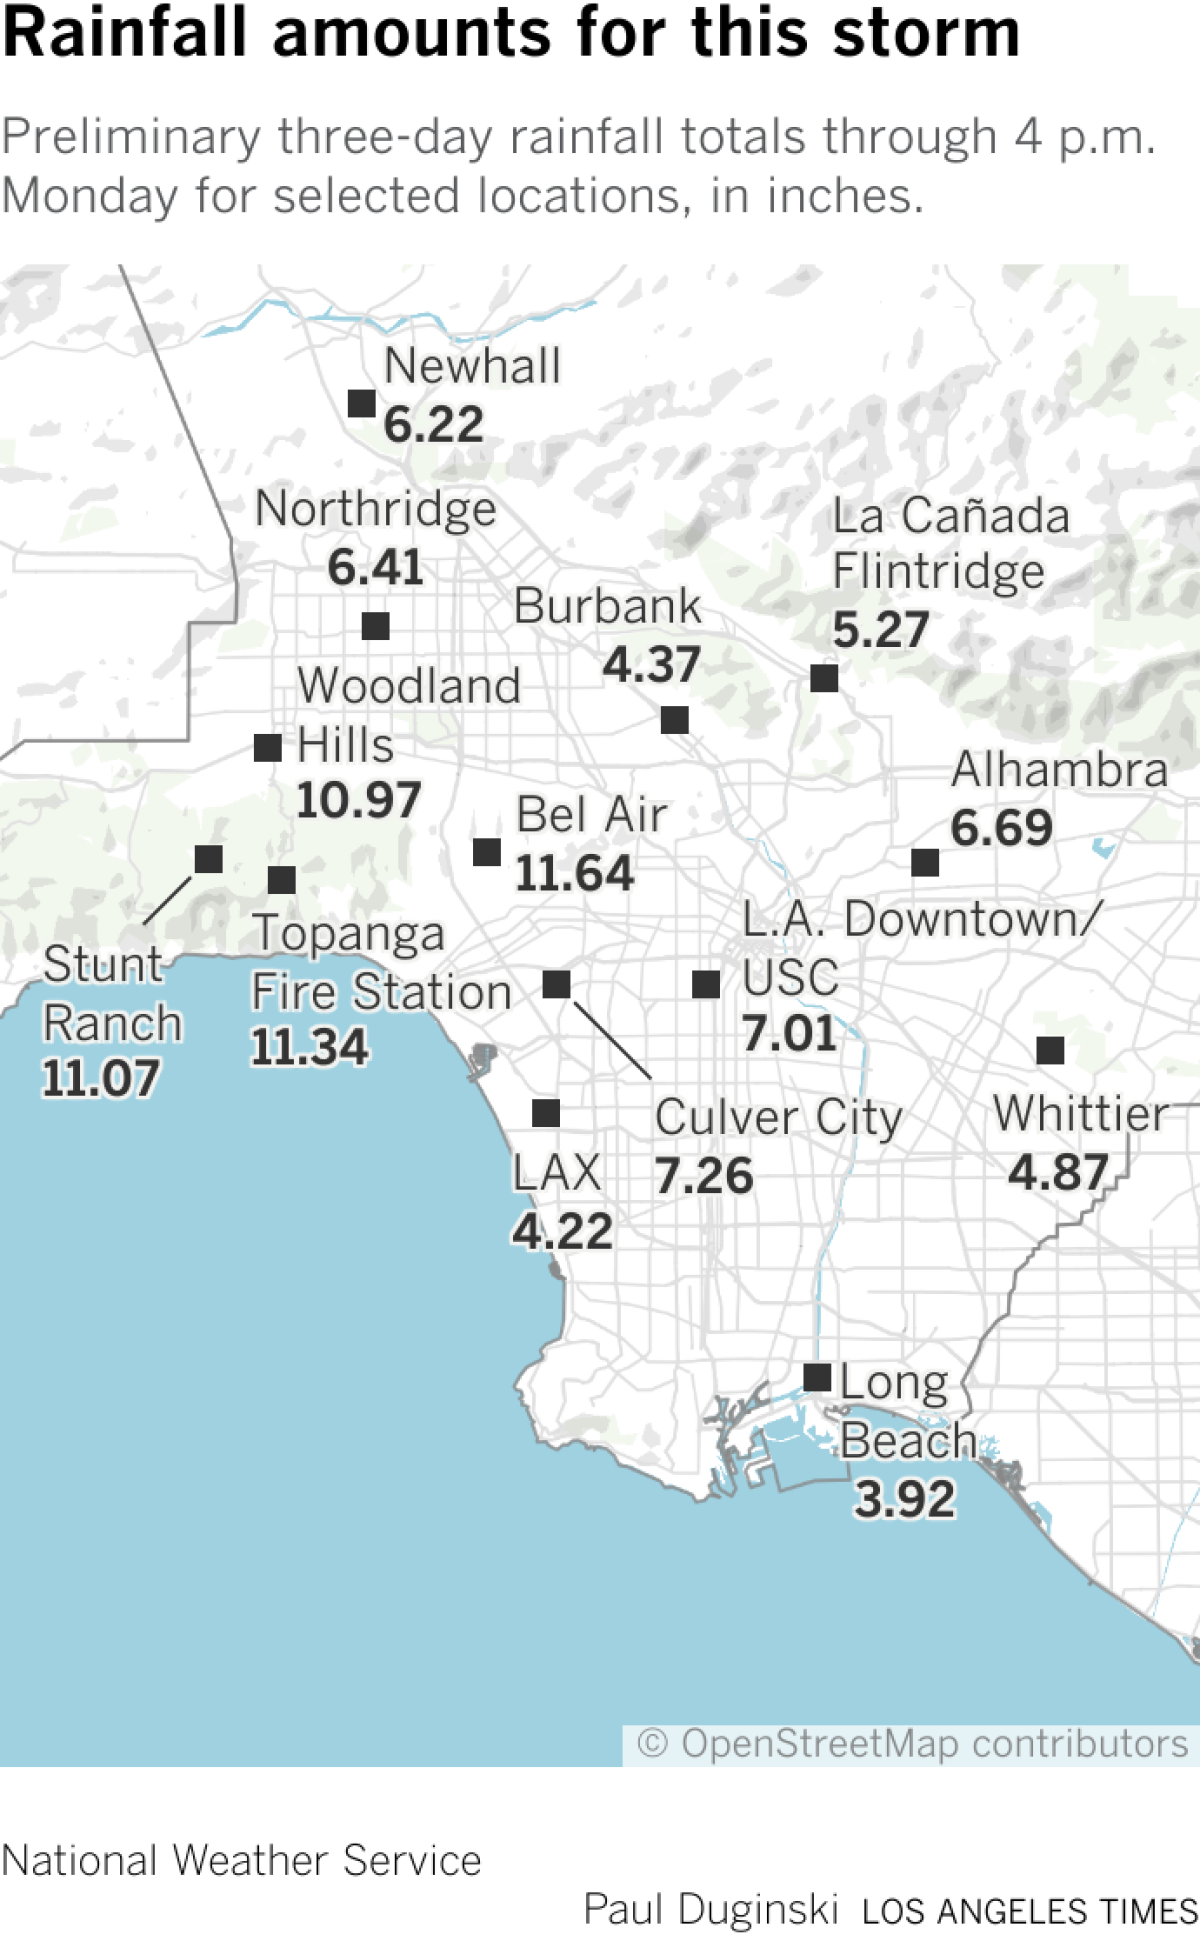 Preliminary rainfall amounts for current storm through 10 a.m. Monday.